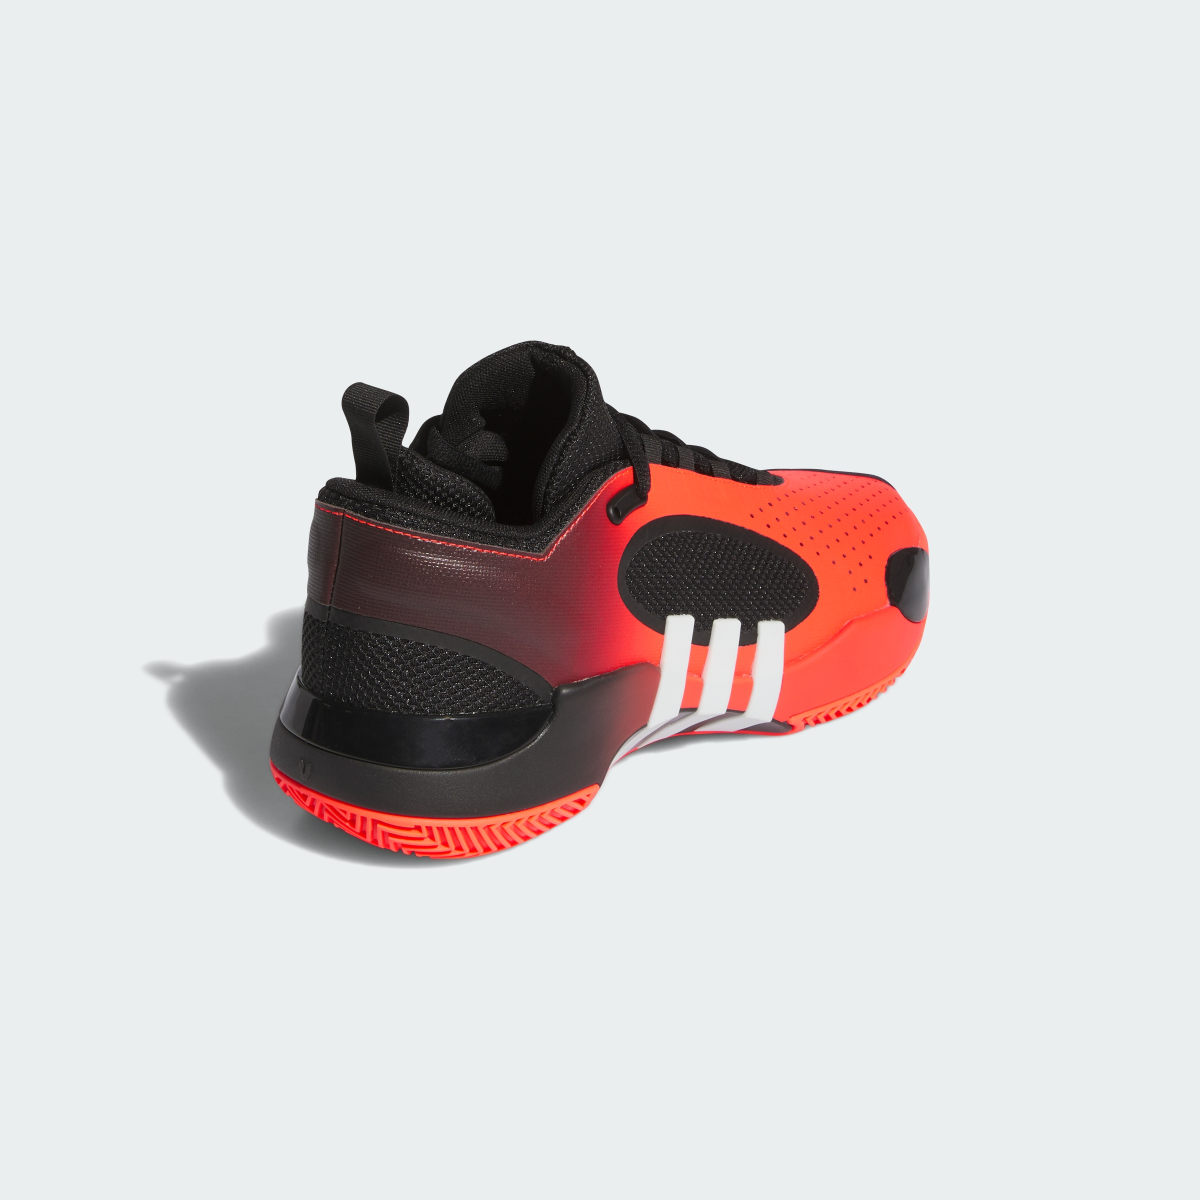 Adidas D.O.N Issue 5 Basketball Shoes. 6